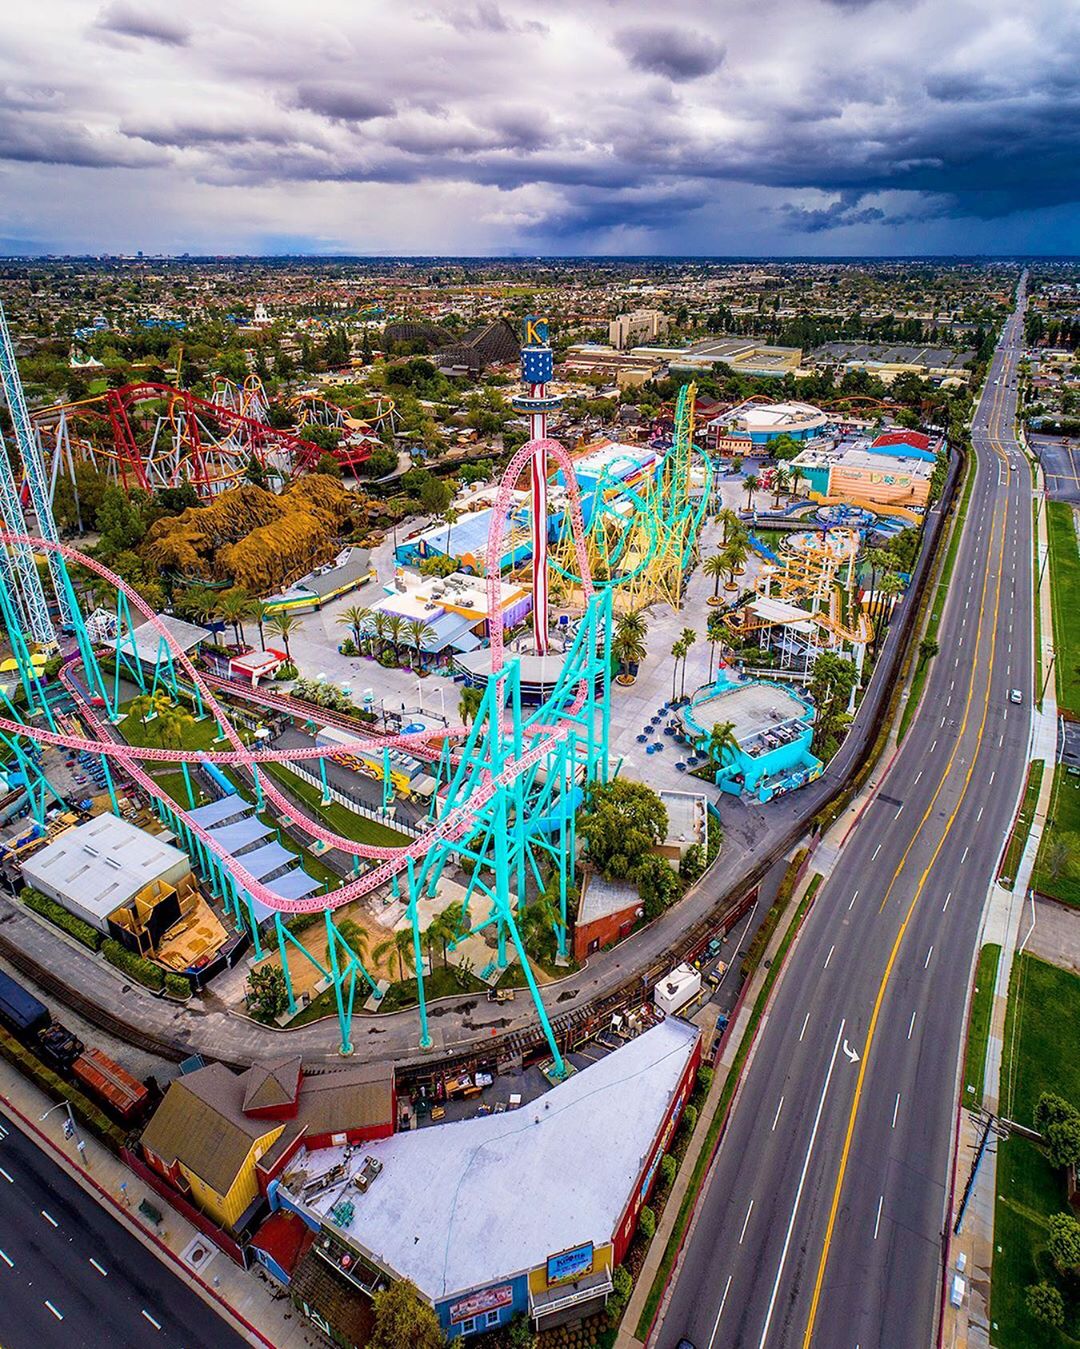 Drone Photo of Knotts Berry Farm Rollercoaster in Buena Park, Los Angeles, CA. Photo by Instagram user @svotographs